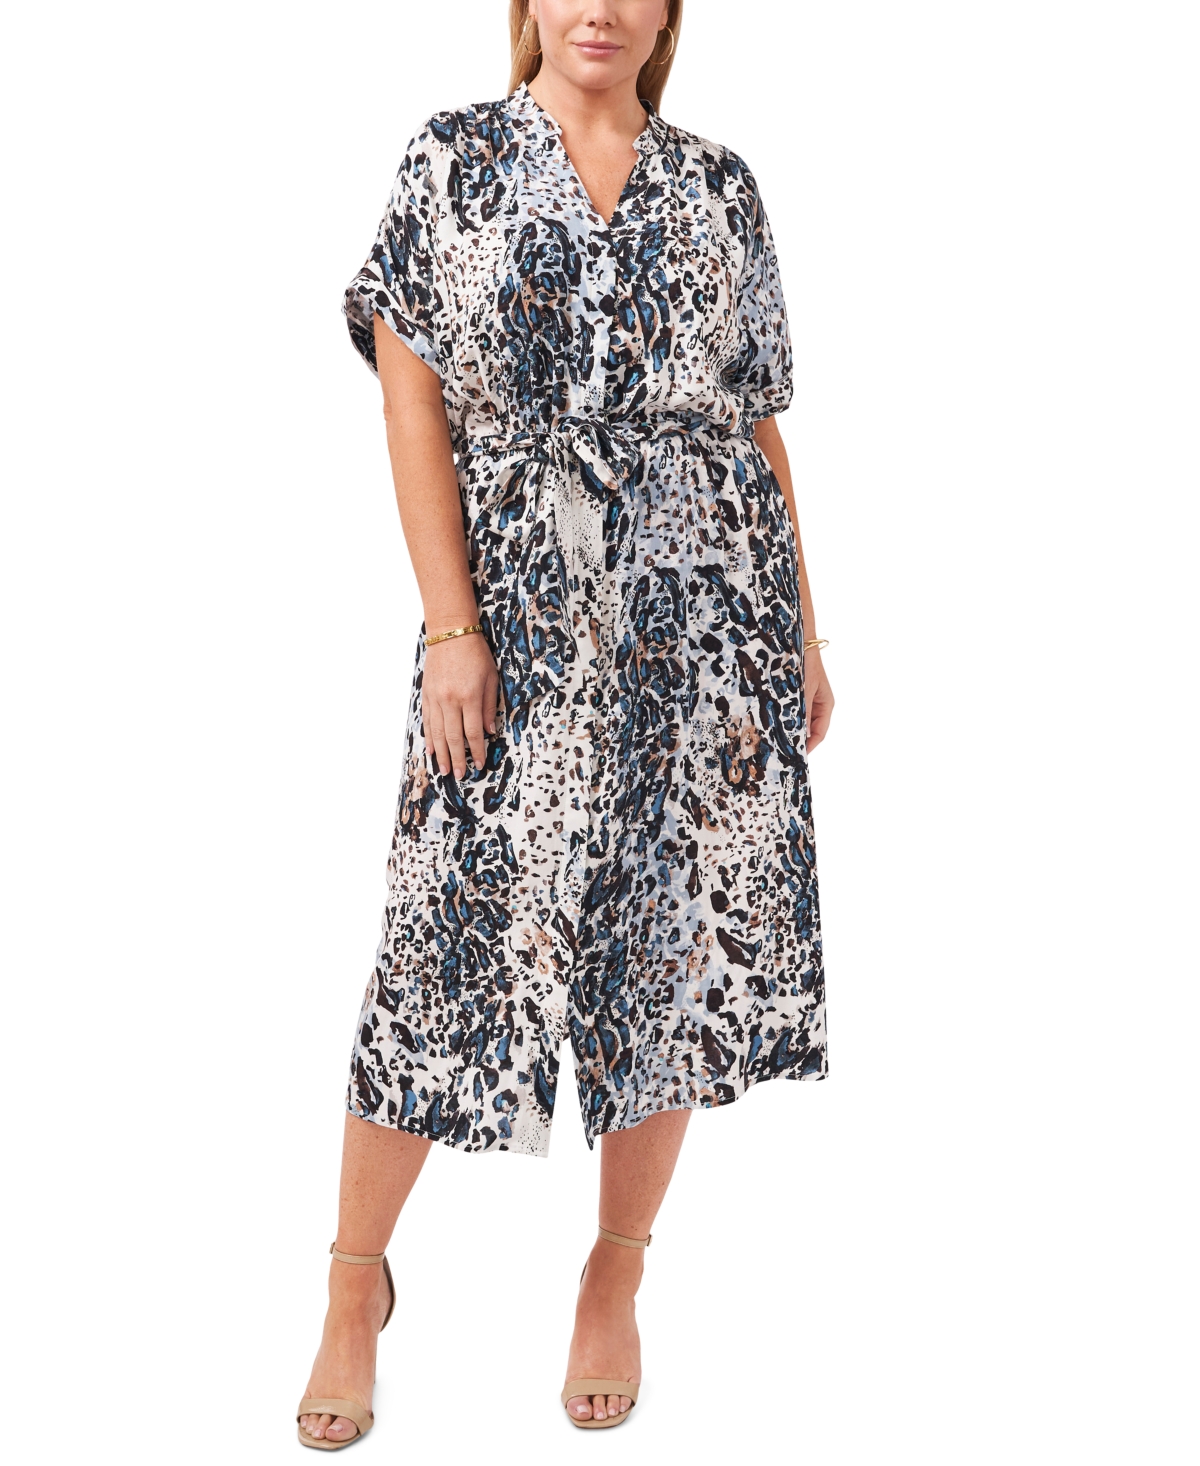 Plus Size Printed Dress - Cafe